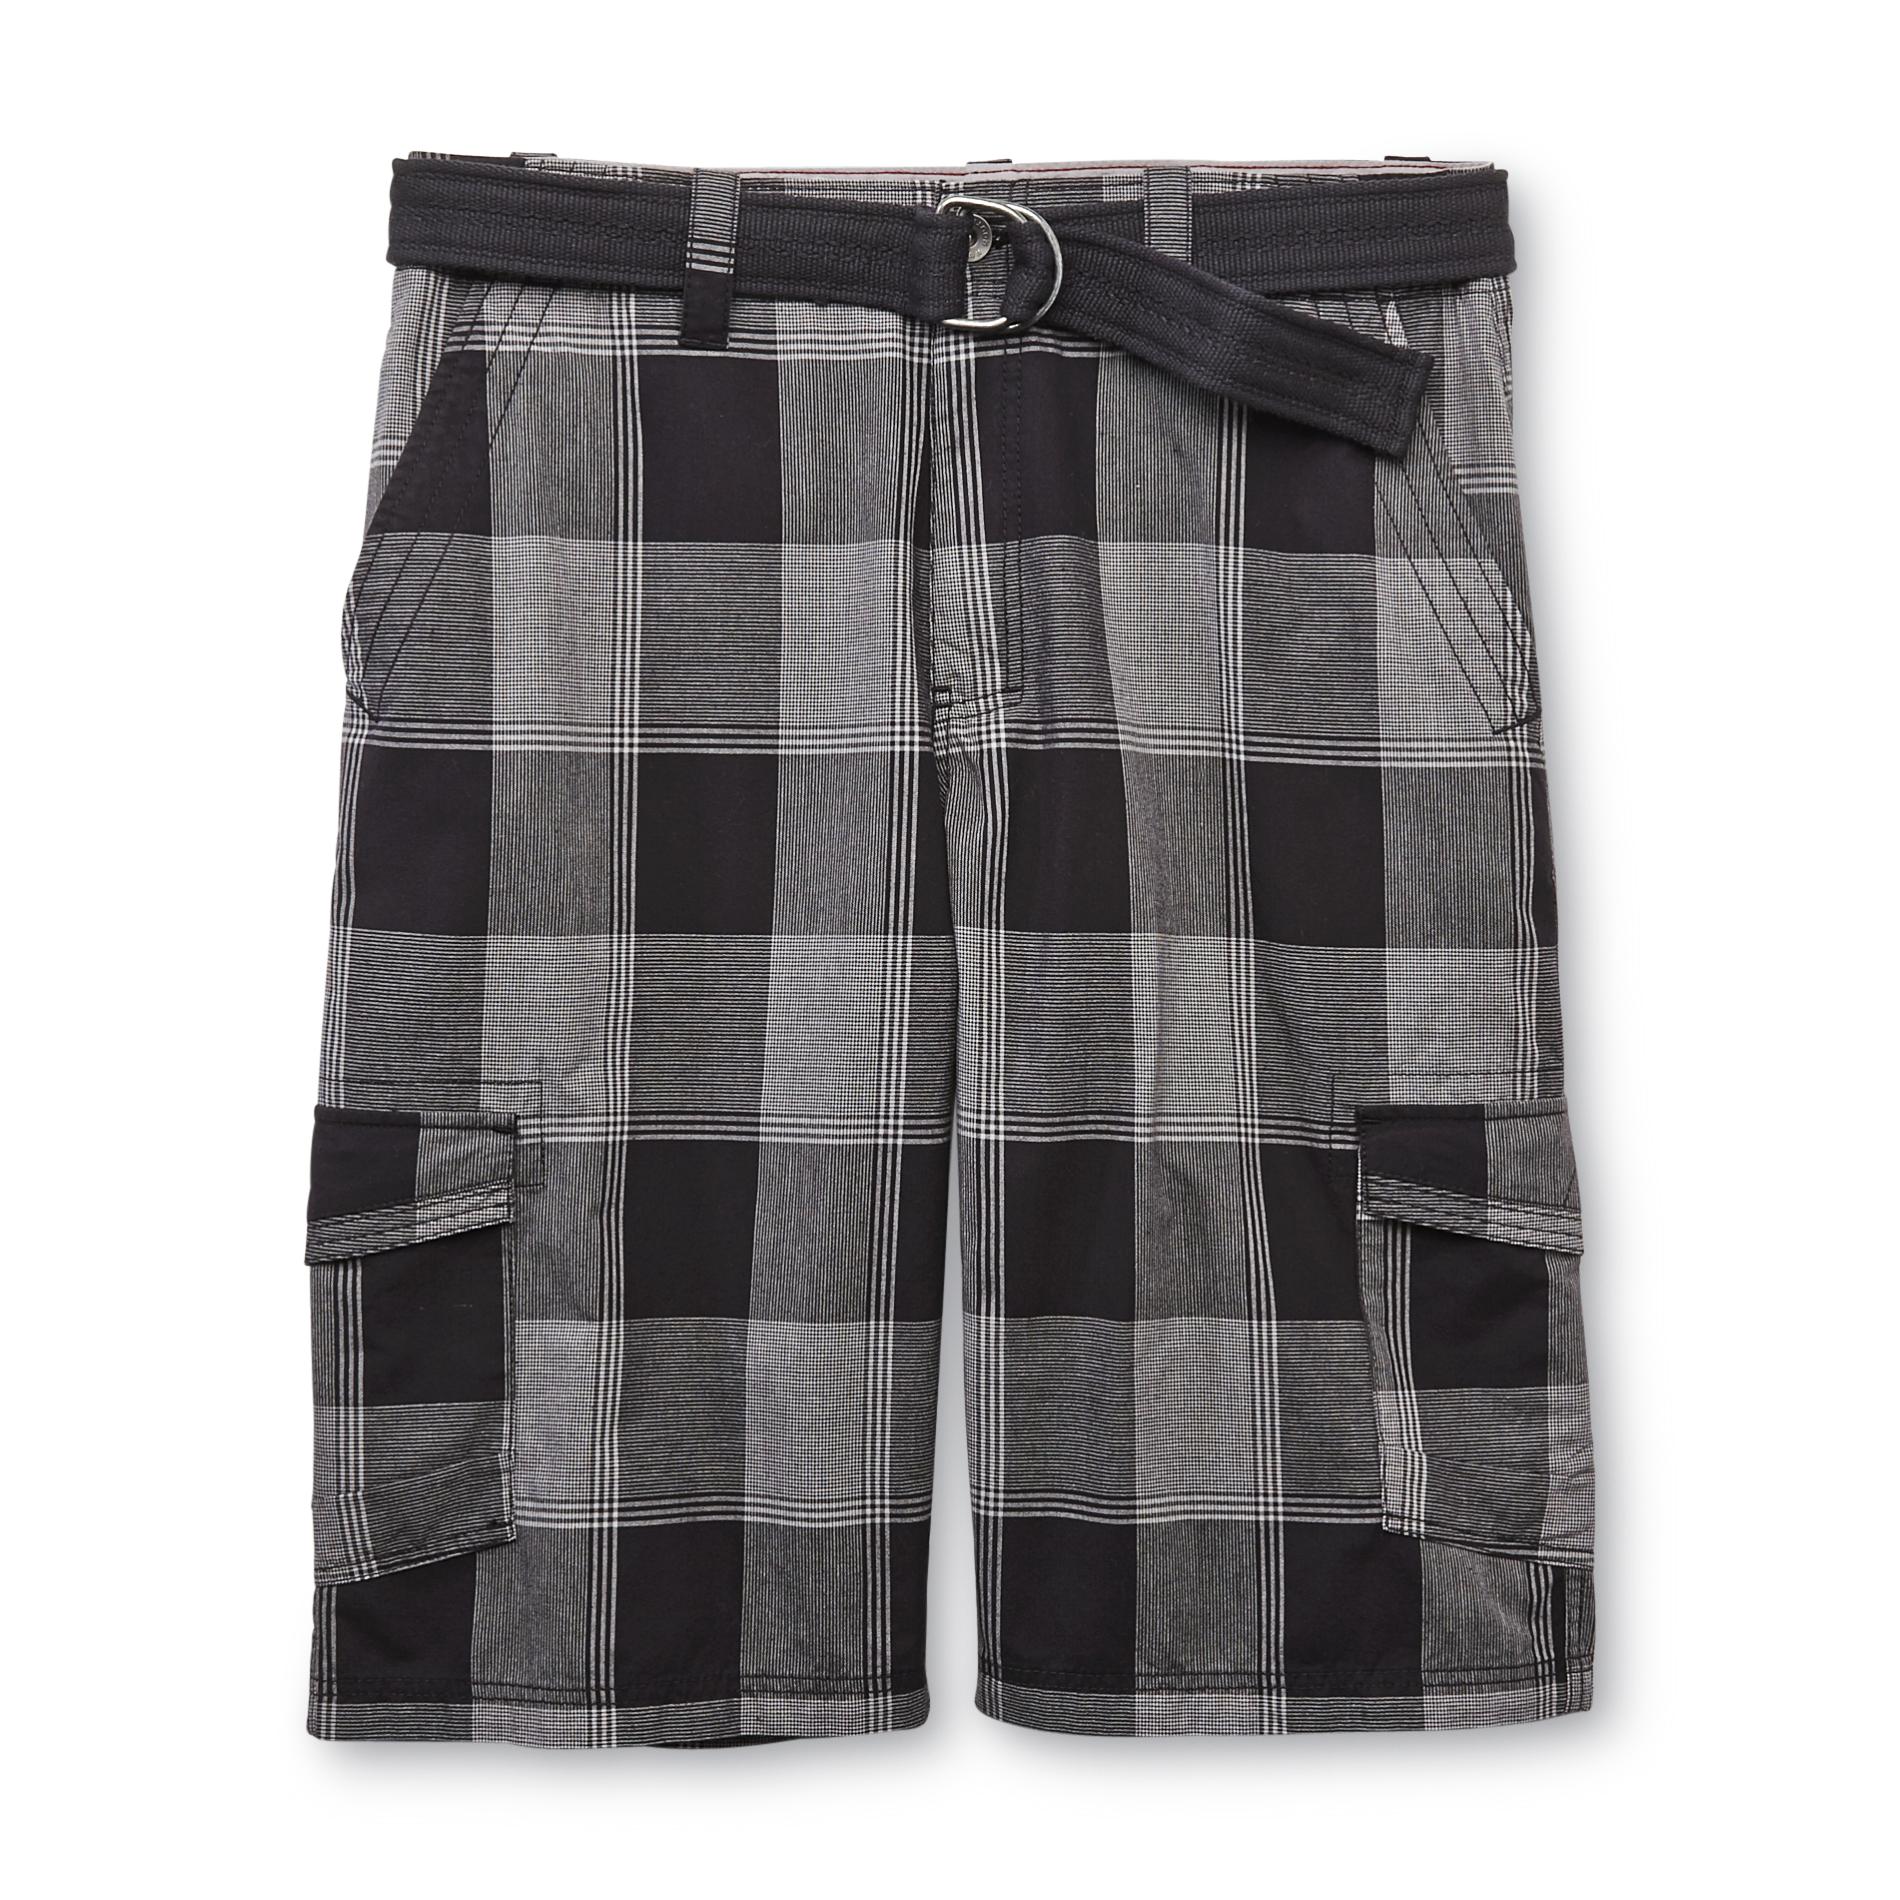 Route 66 Men's Belted Cargo Shorts - Plaid